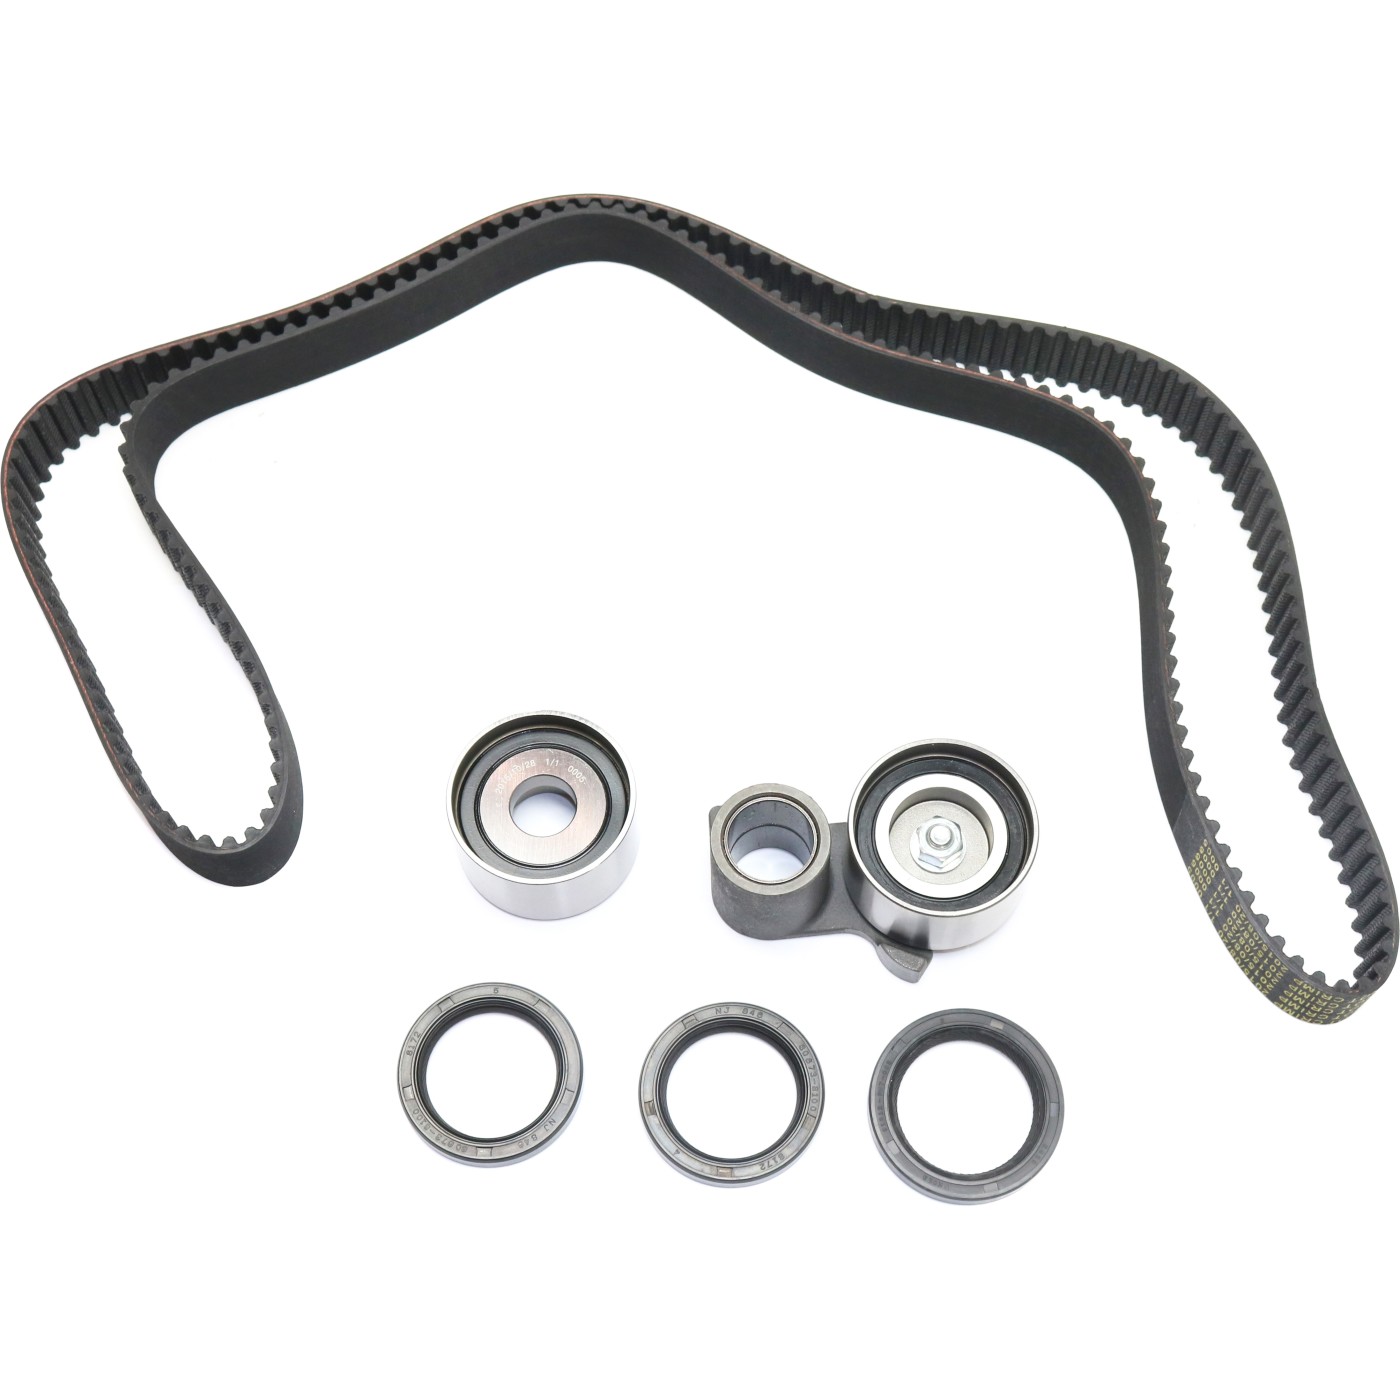 Timing Belt Kit For 9704 Honda Accord Acura CL TL MDX 3.0